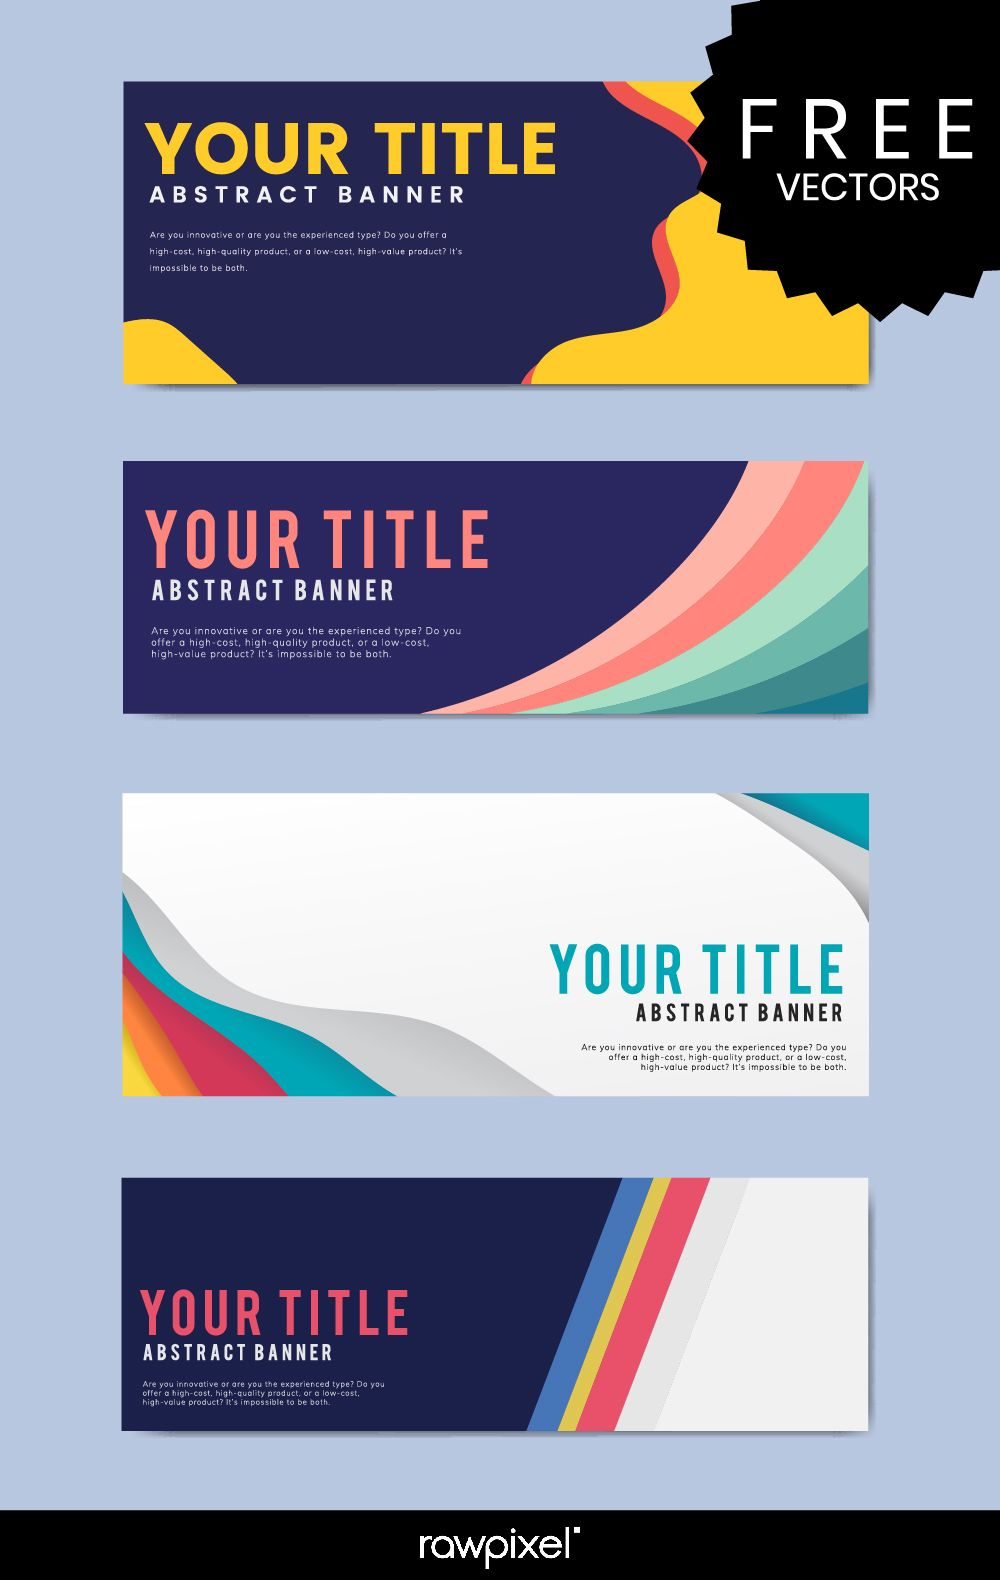 Download Free Modern Business Banner Templates At Rawpixel In Free Website Banner Templates Download